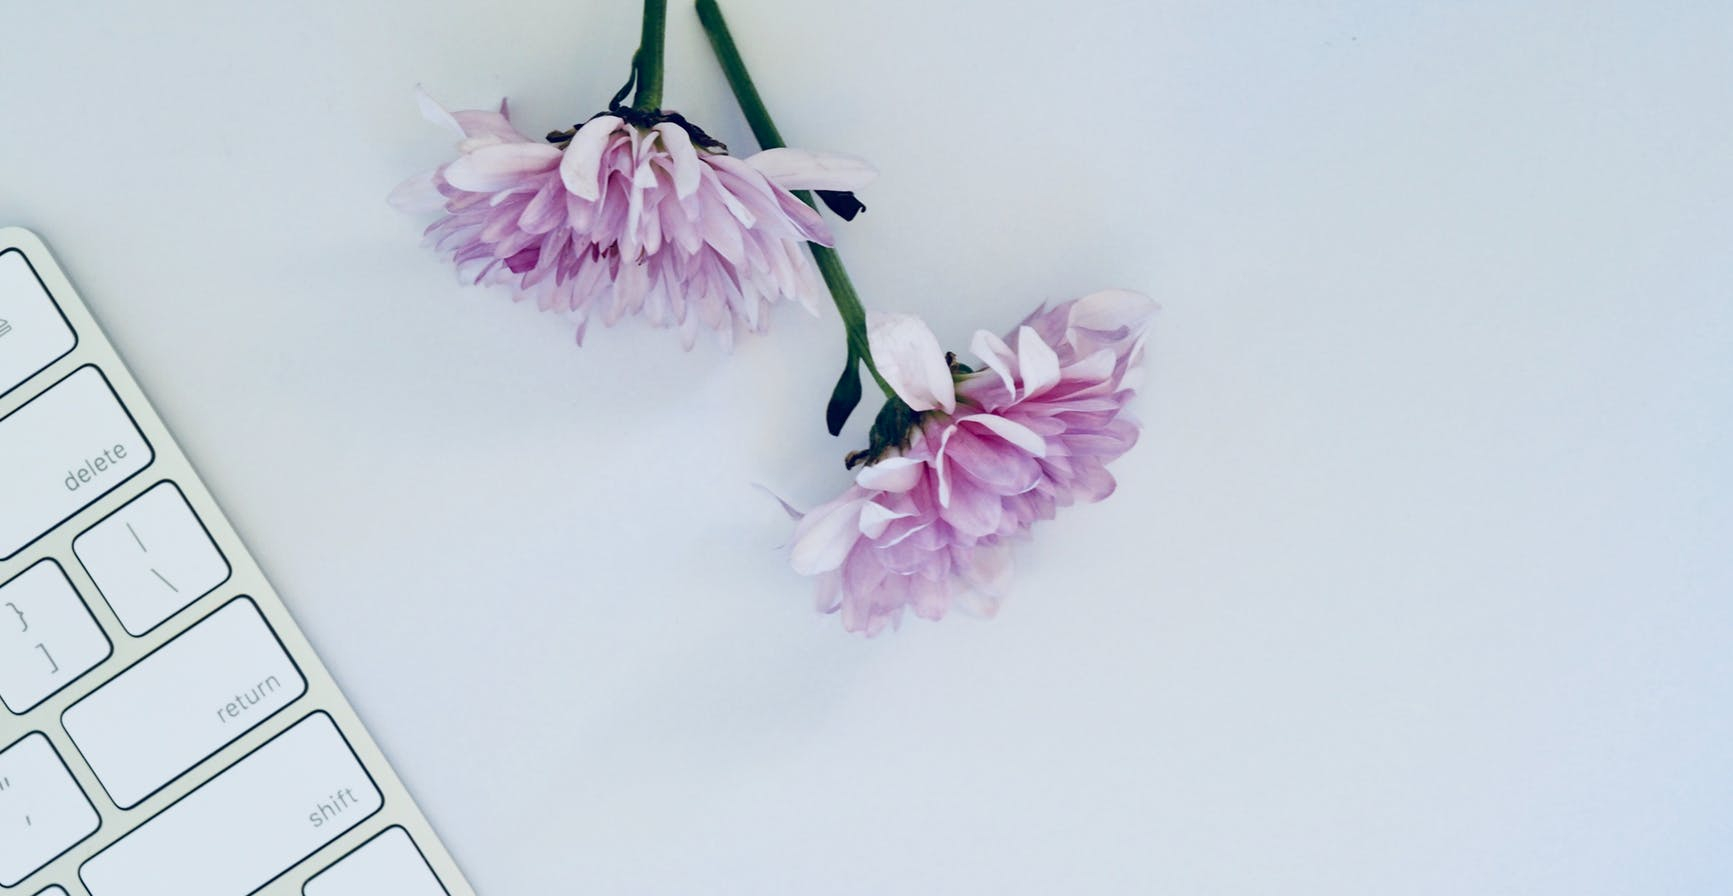 two purple flowers and white keyboard